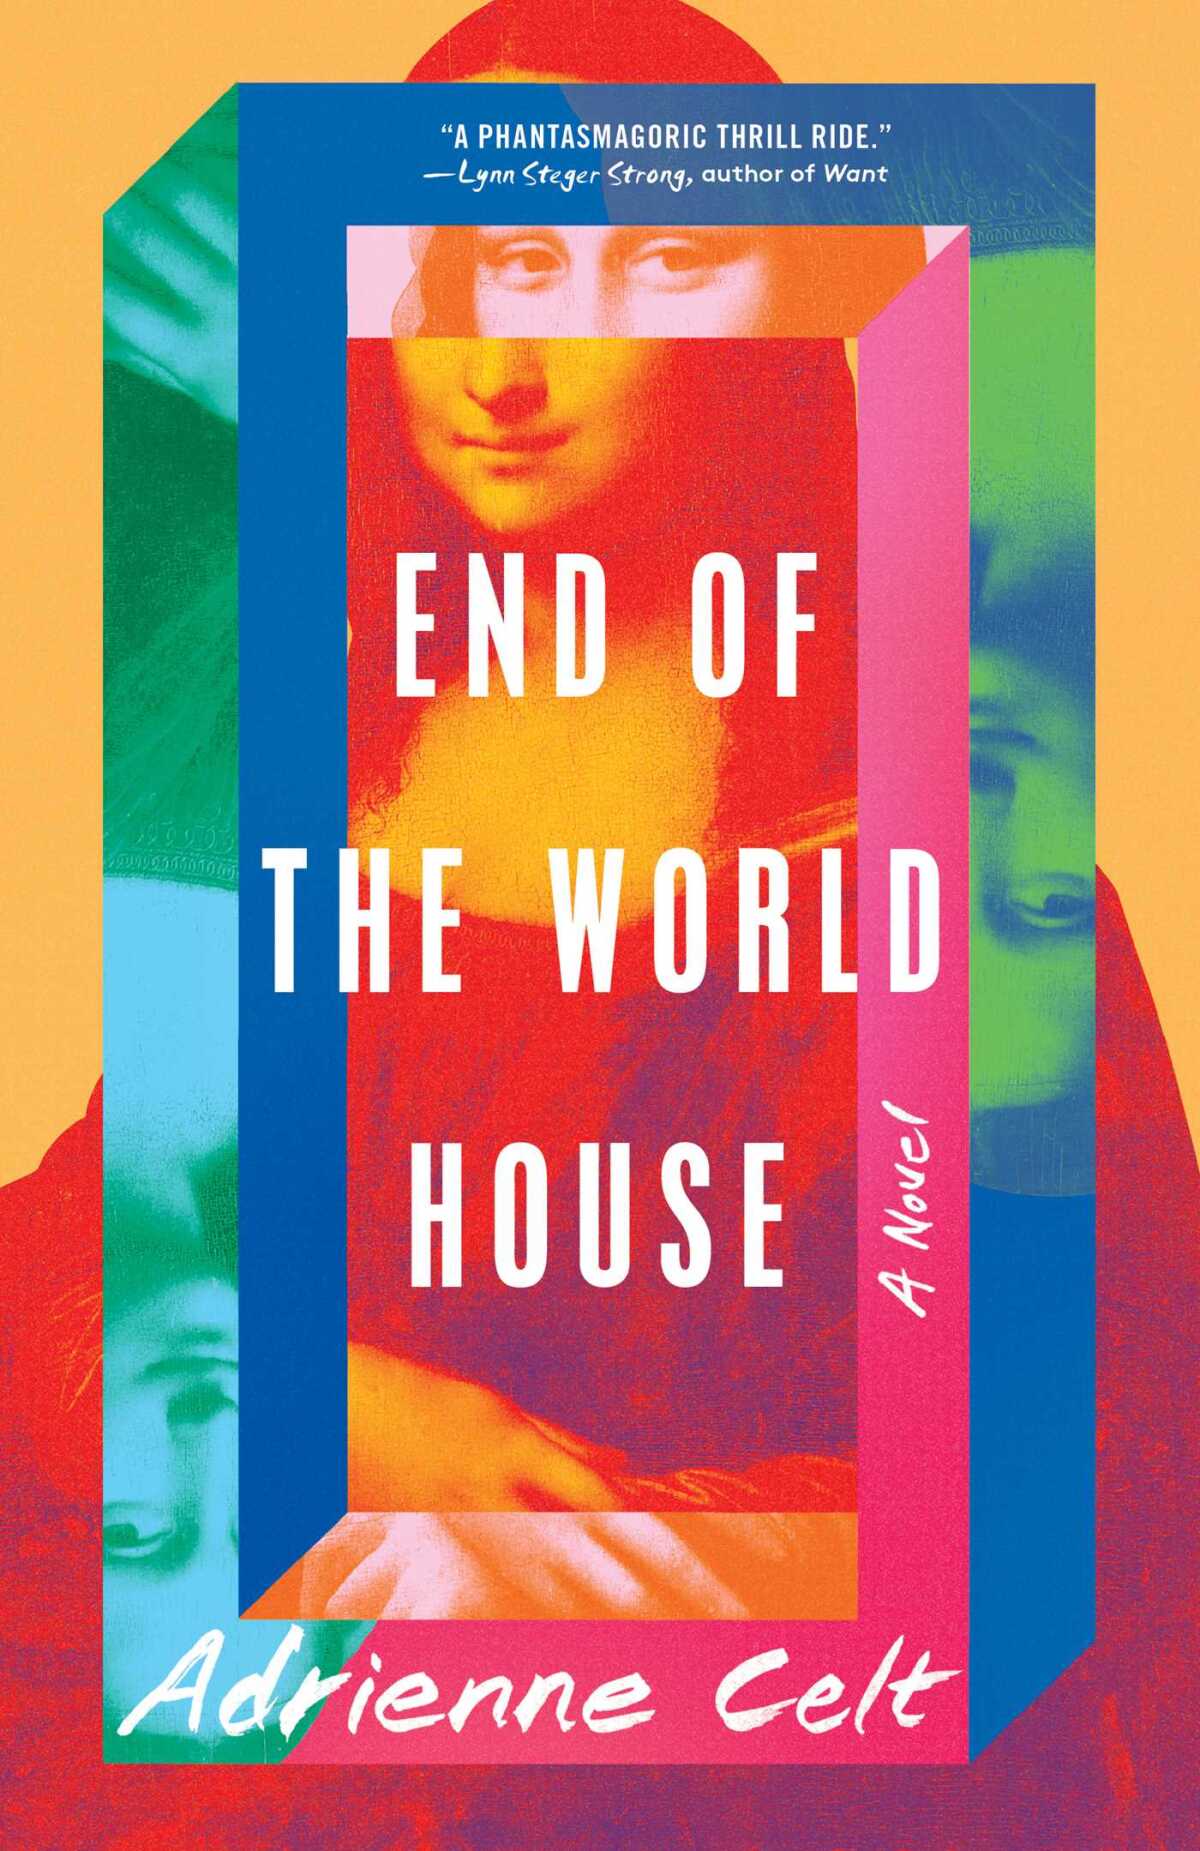 "End of the World House," by Adrienne Celt